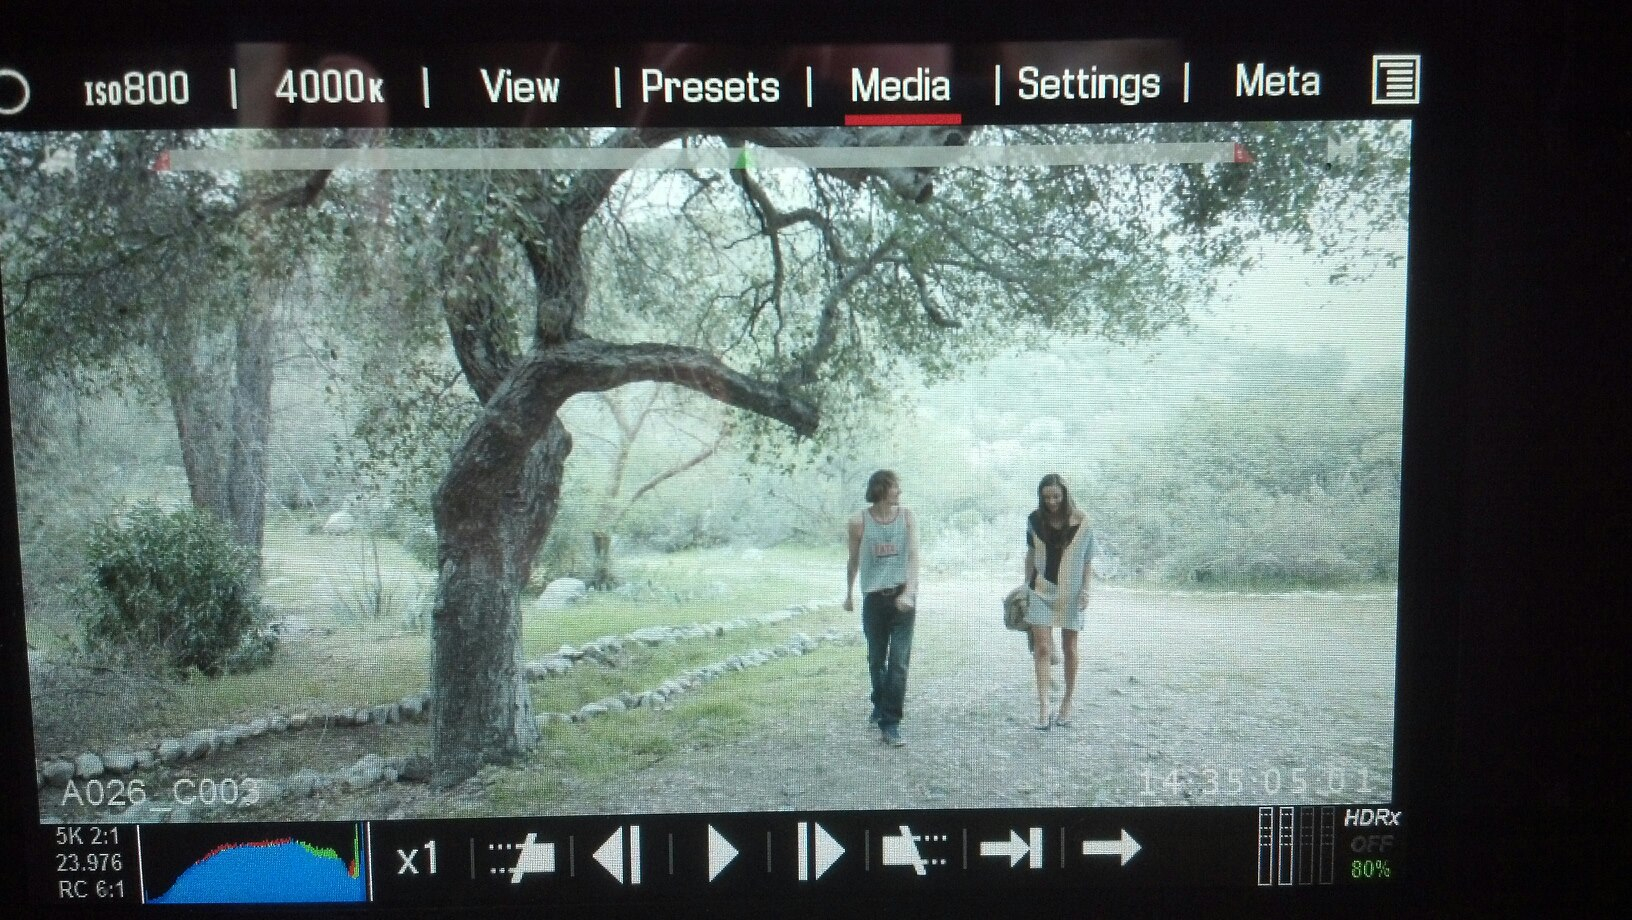 Tamzin Brown and Jesse Woodrow on location shooting in Tableau Vivant.